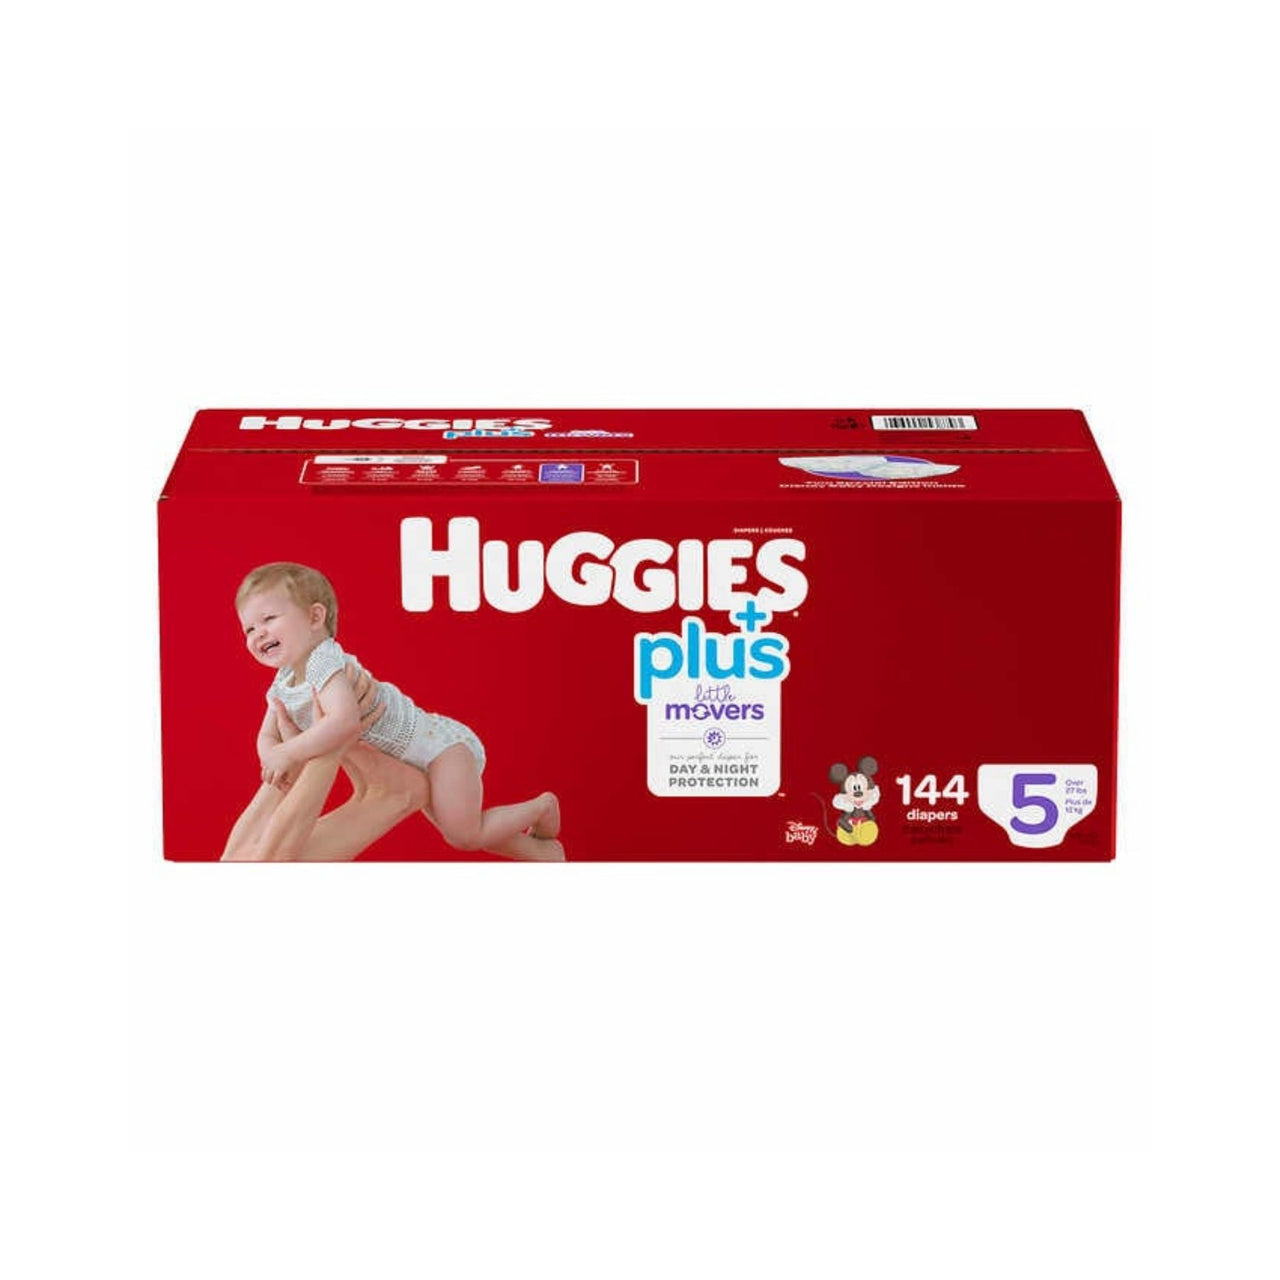 Image of Huggies Little Movers Plus, Size 5, Pack of 144 - 1 x 4494 Grams